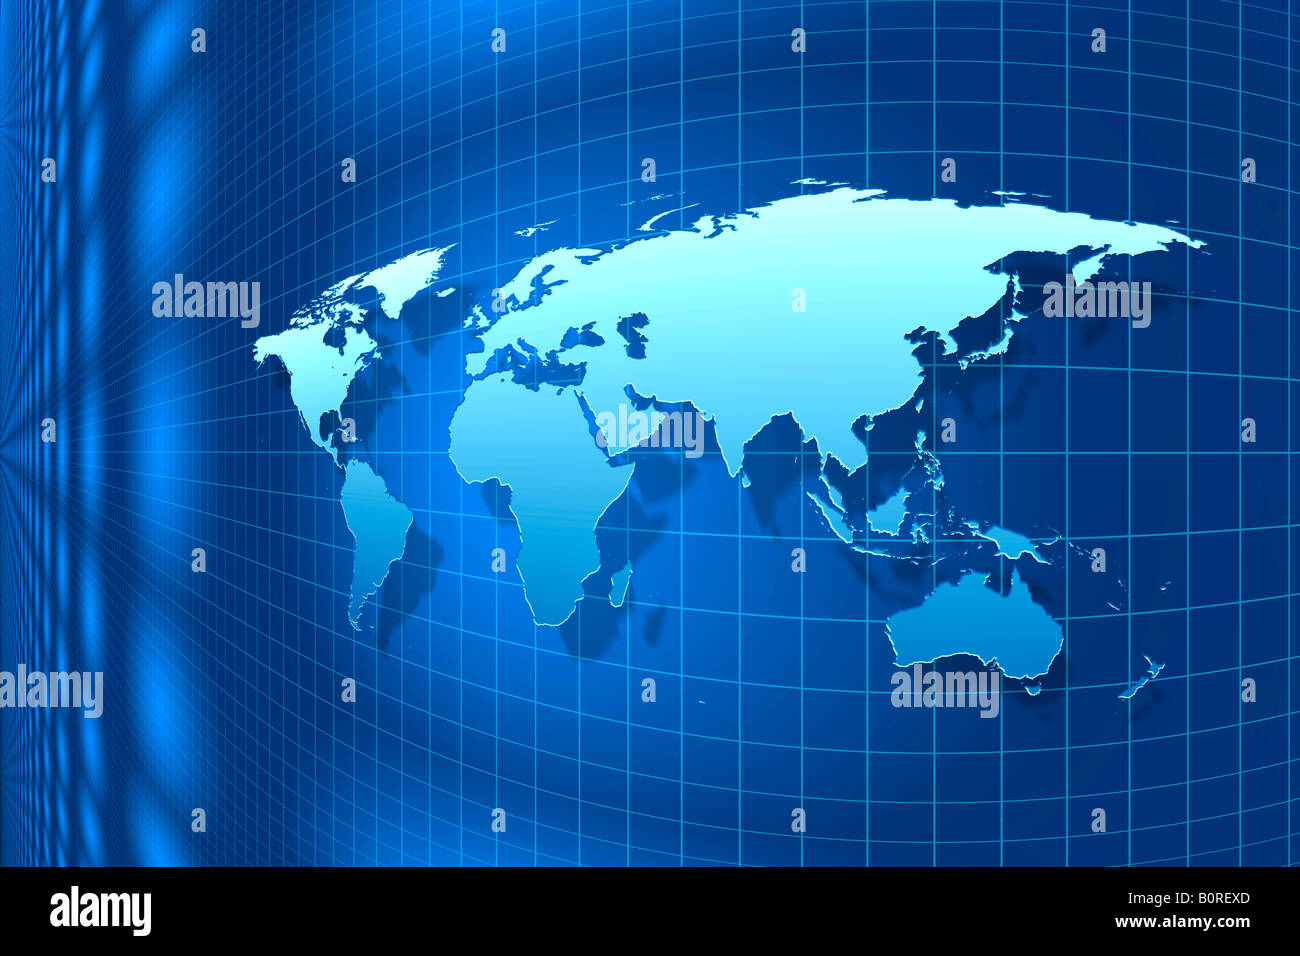 Illuminated blue world map against blue background with grid structure. Stock Photo